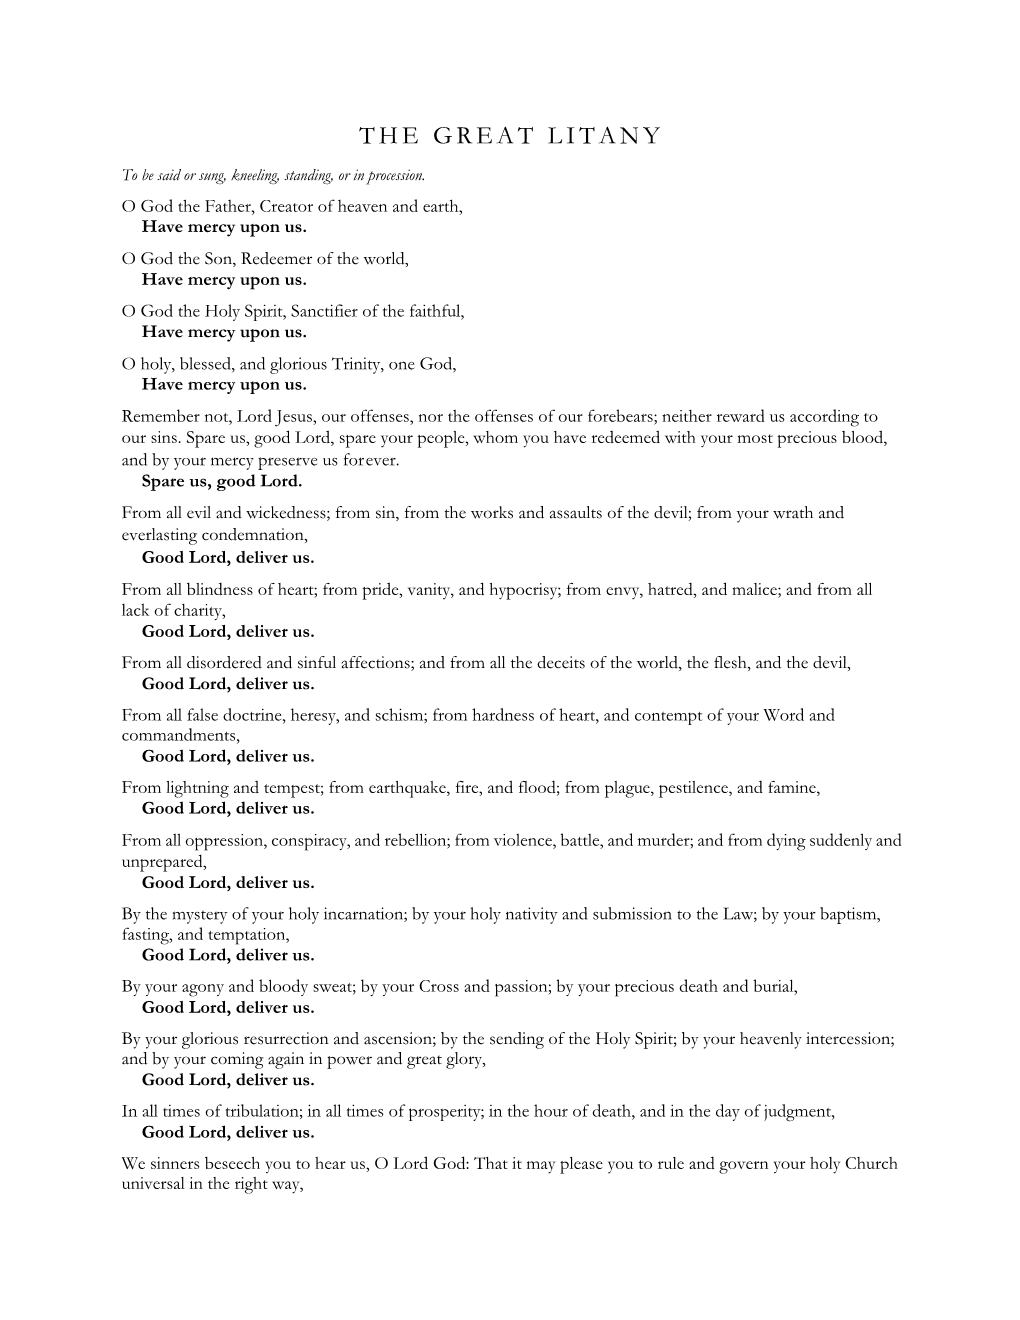 12-Great Litany